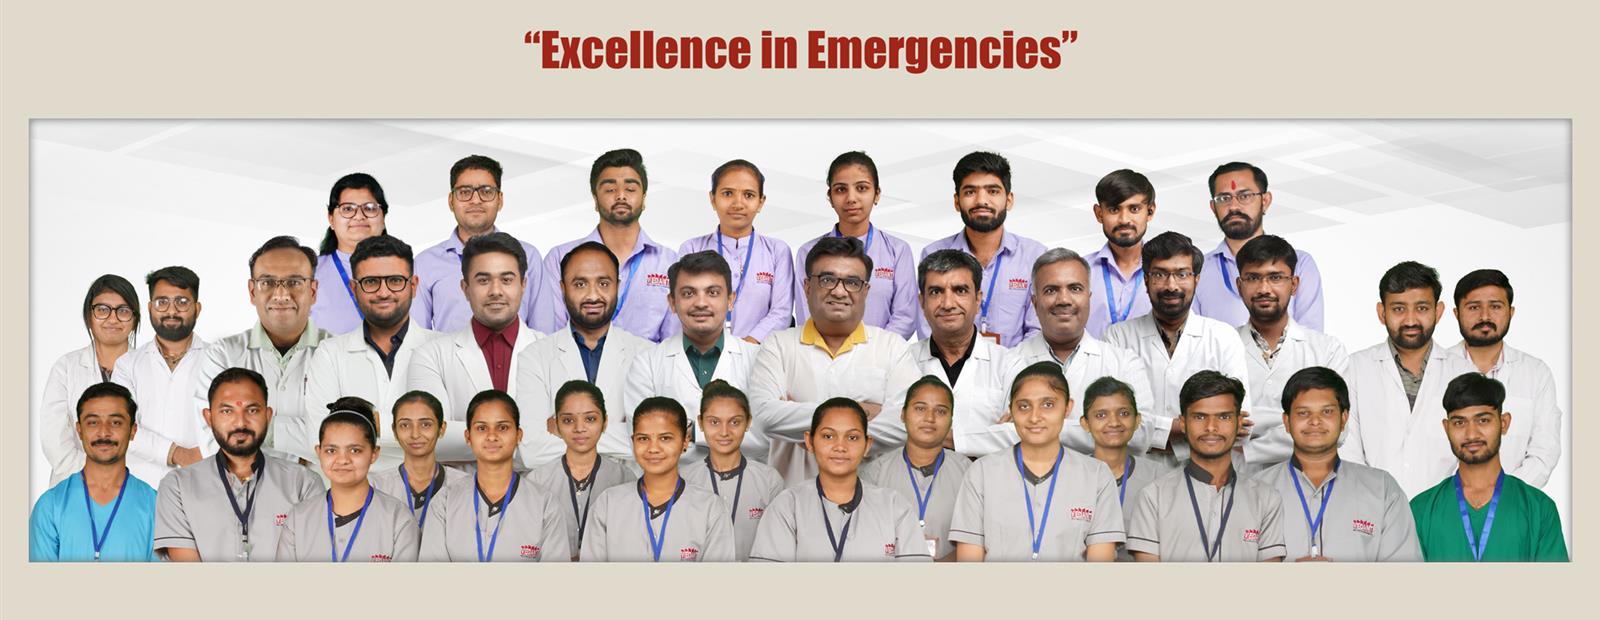 Excellence in Emergencies